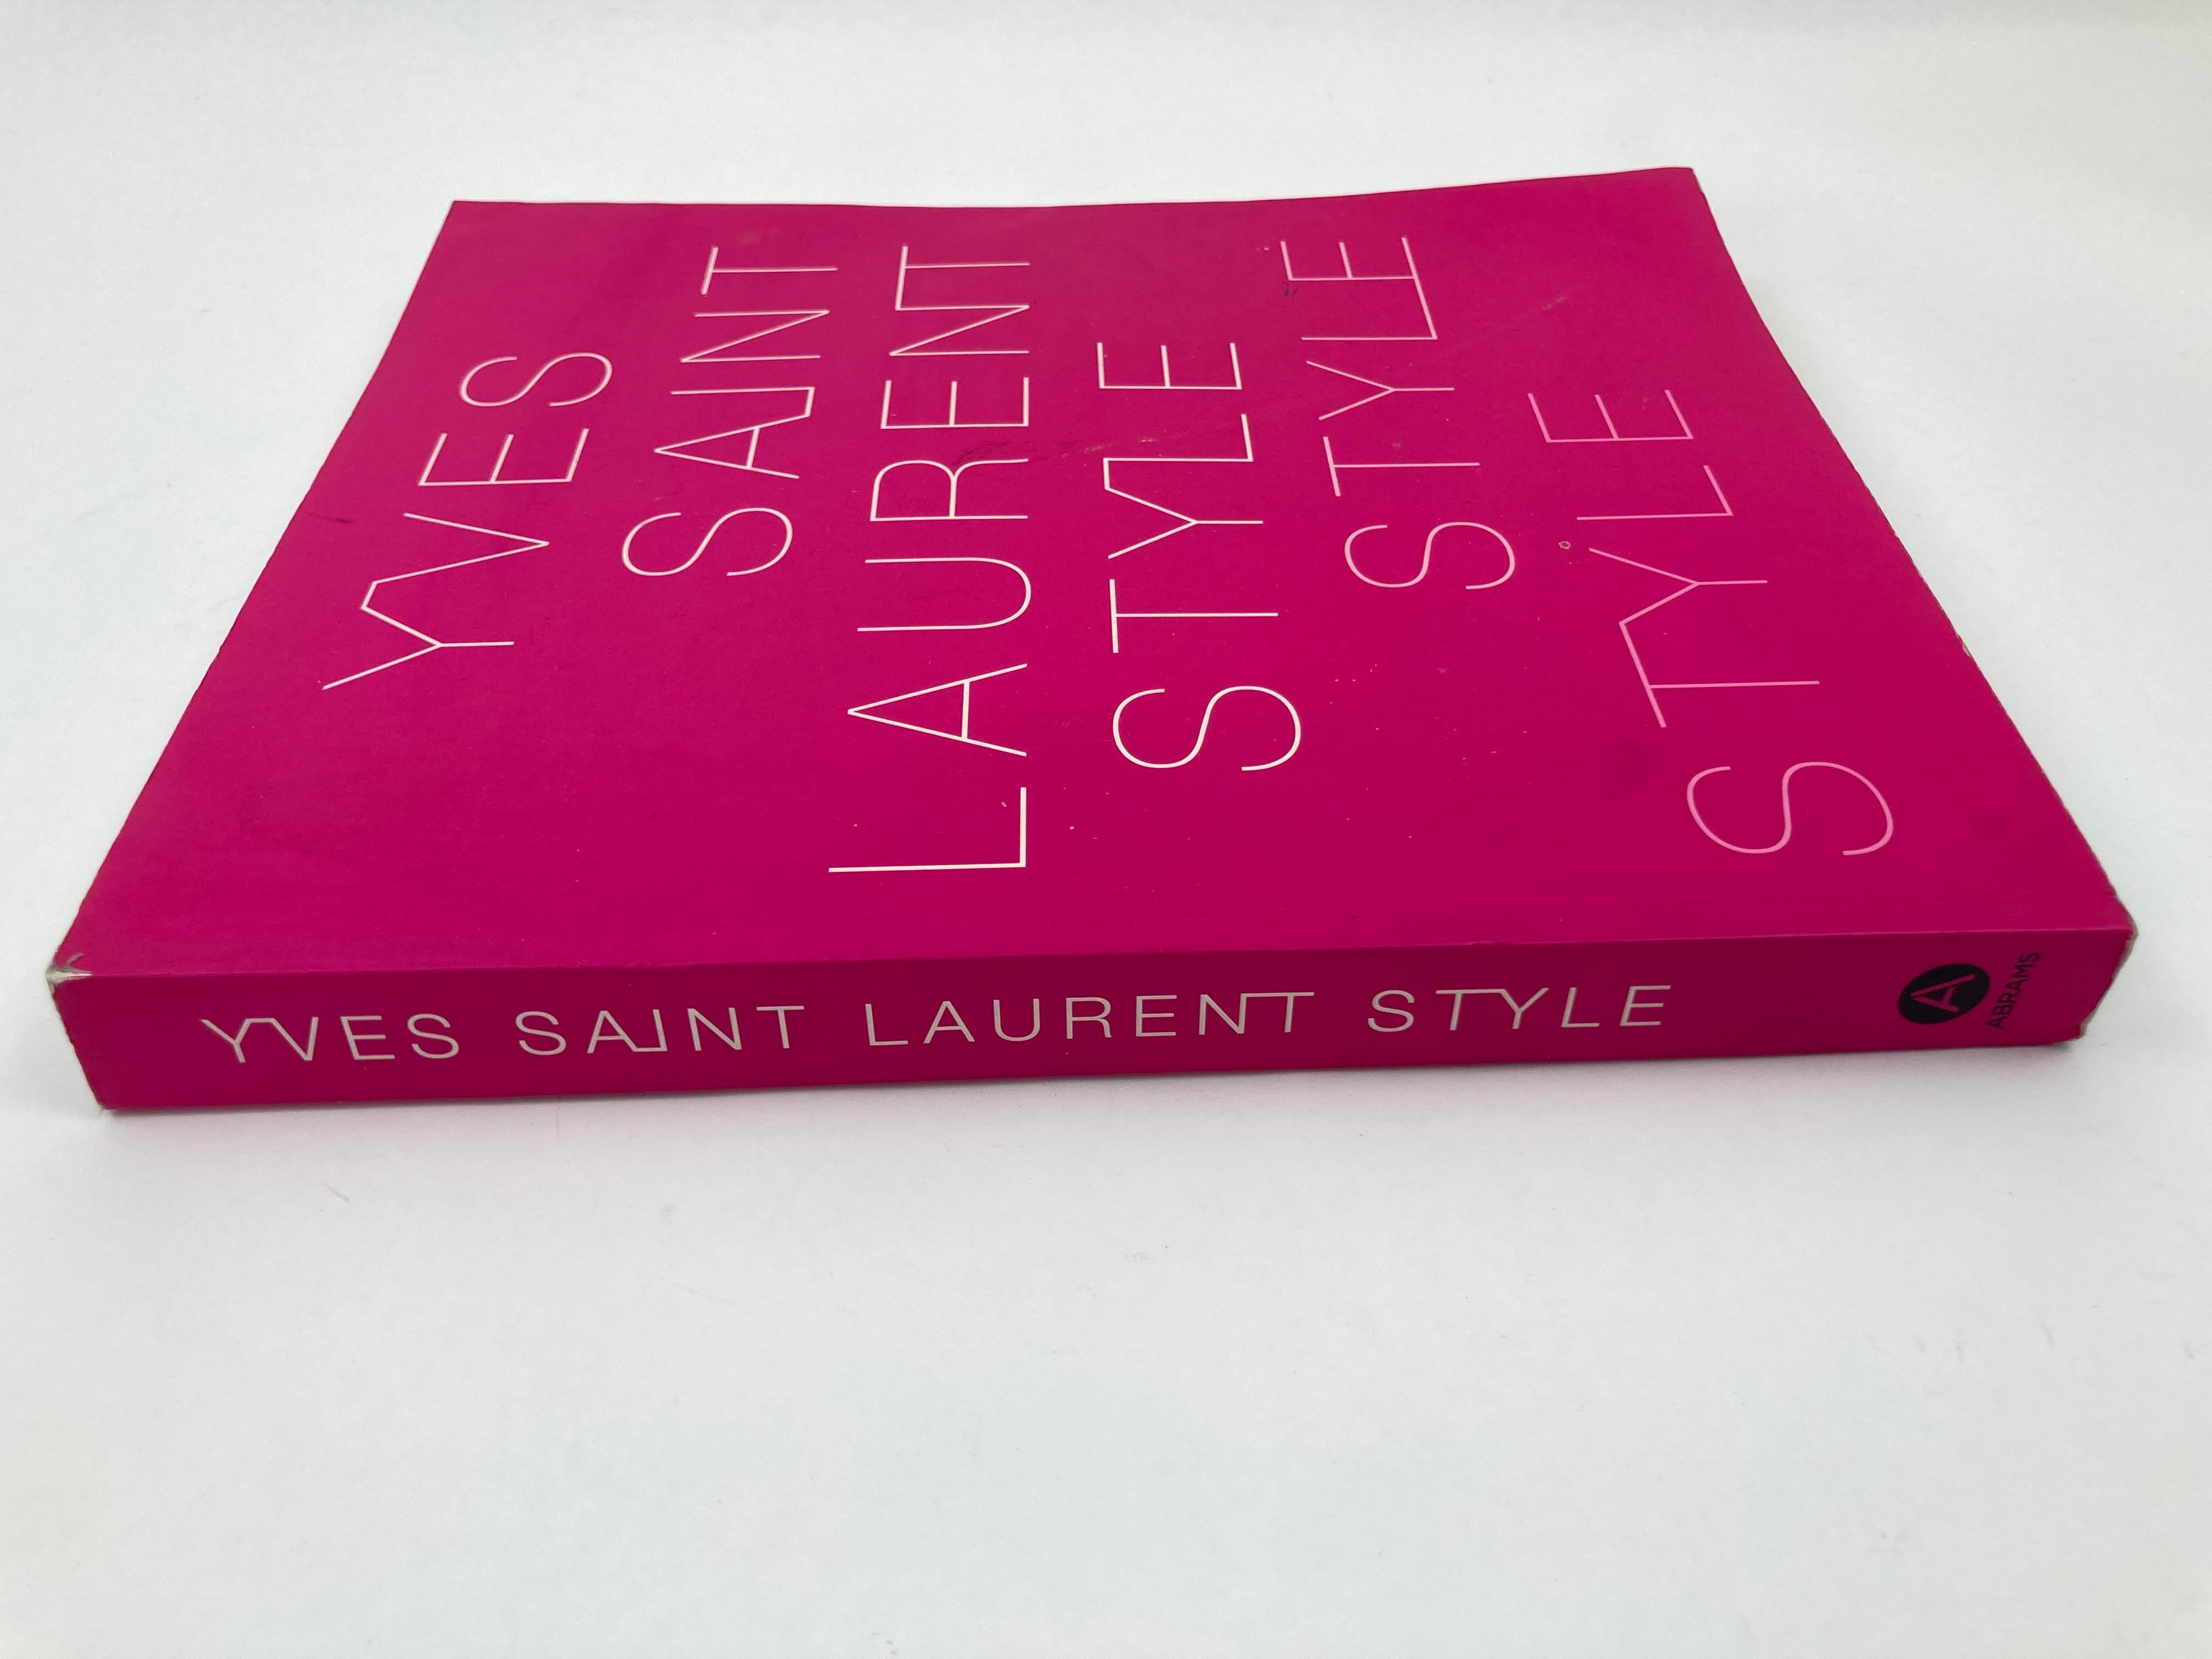 Yves Saint Laurent Style Paperback 2008 Pink book by Foundation Pierre Berge  In Fair Condition For Sale In North Hollywood, CA